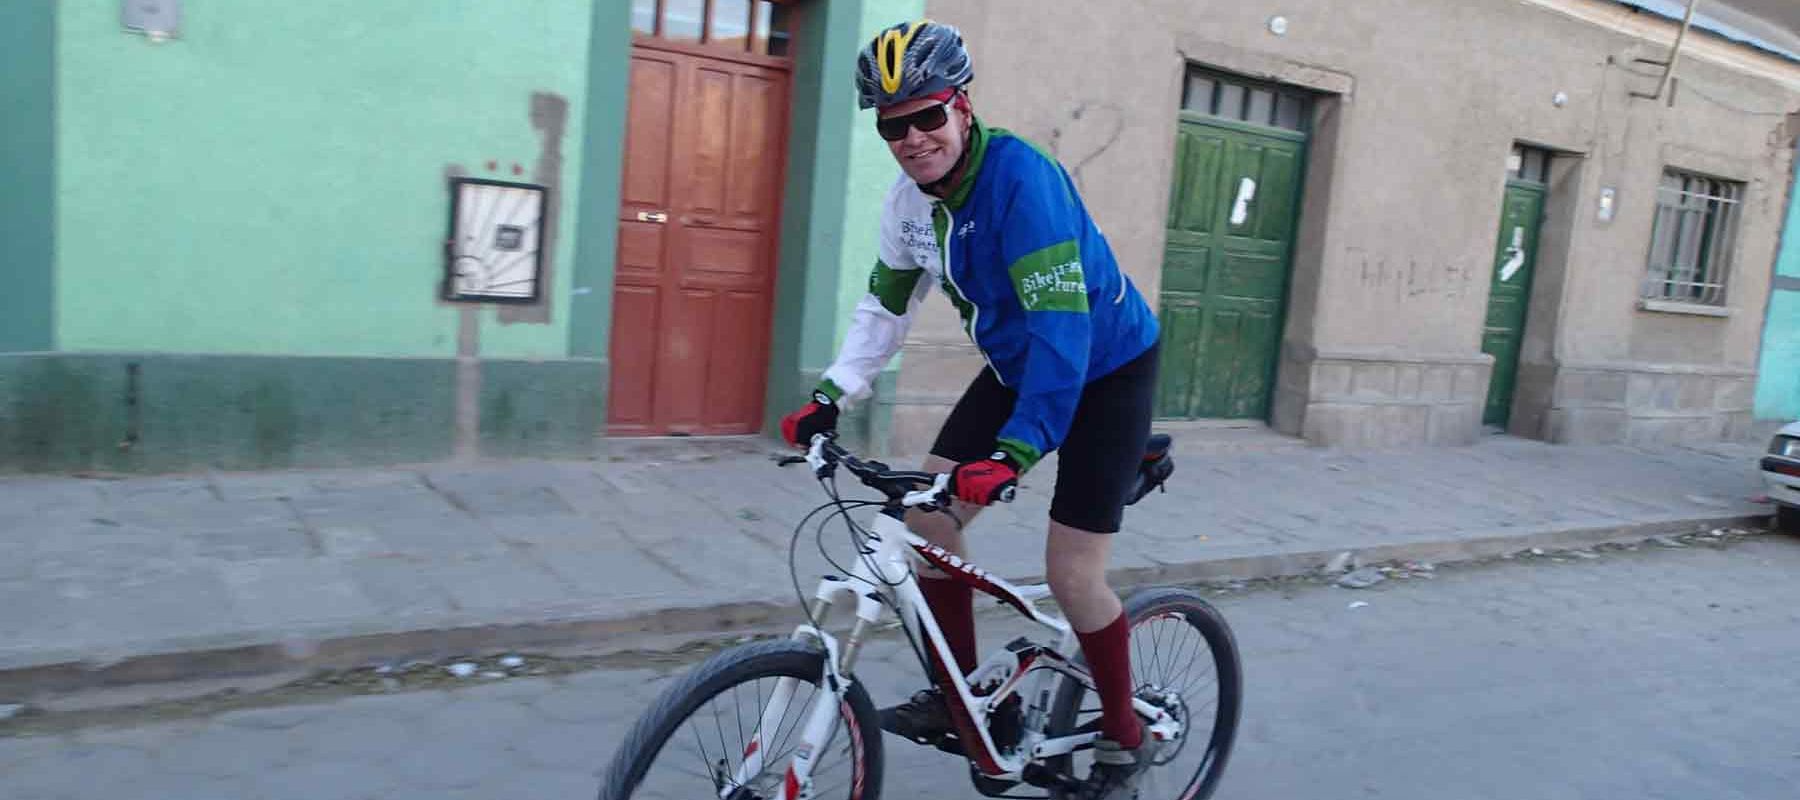 Tour guide biking the streets of Bolivia